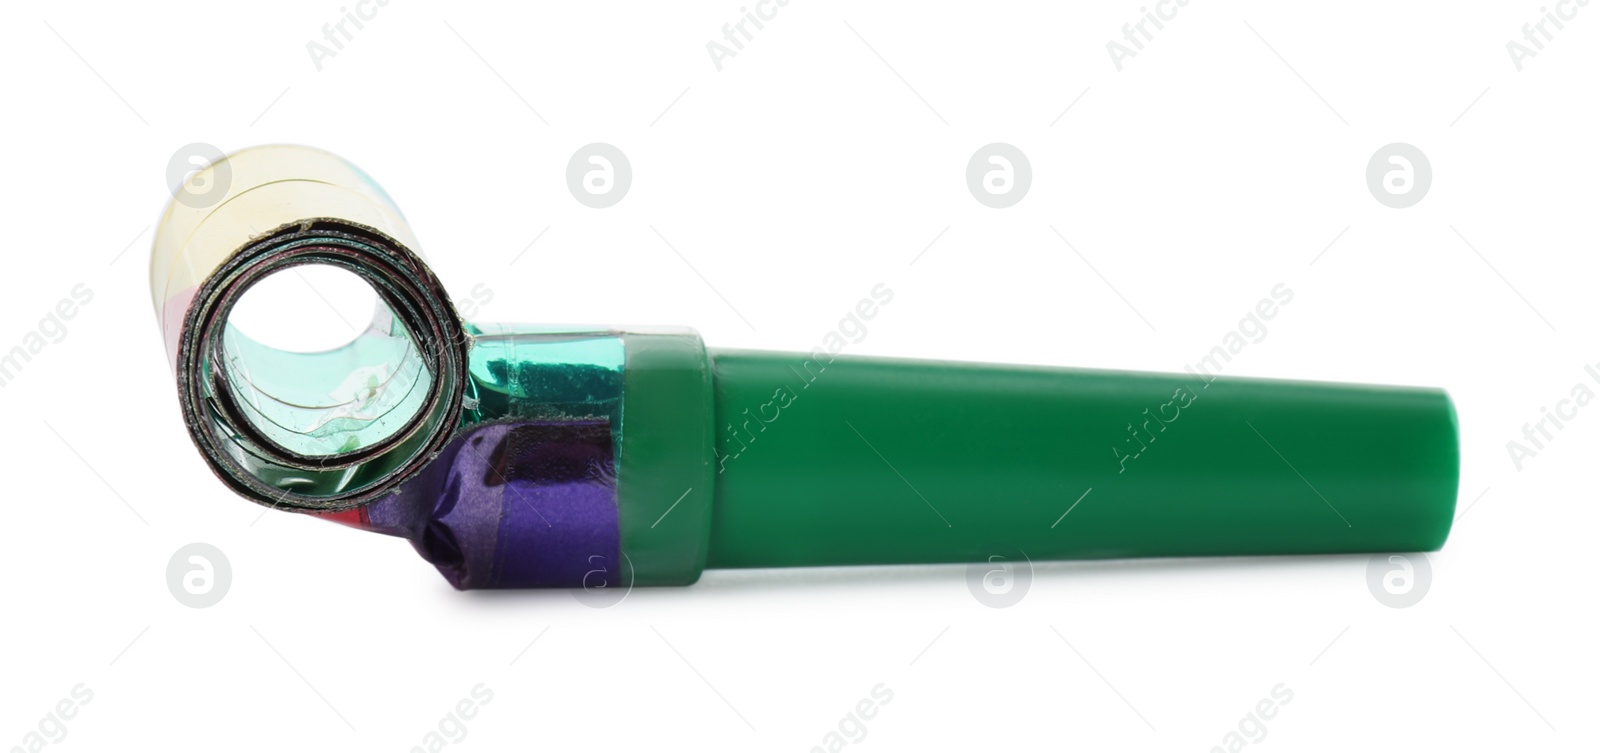 Photo of Bright party blower isolated on white. Festive item